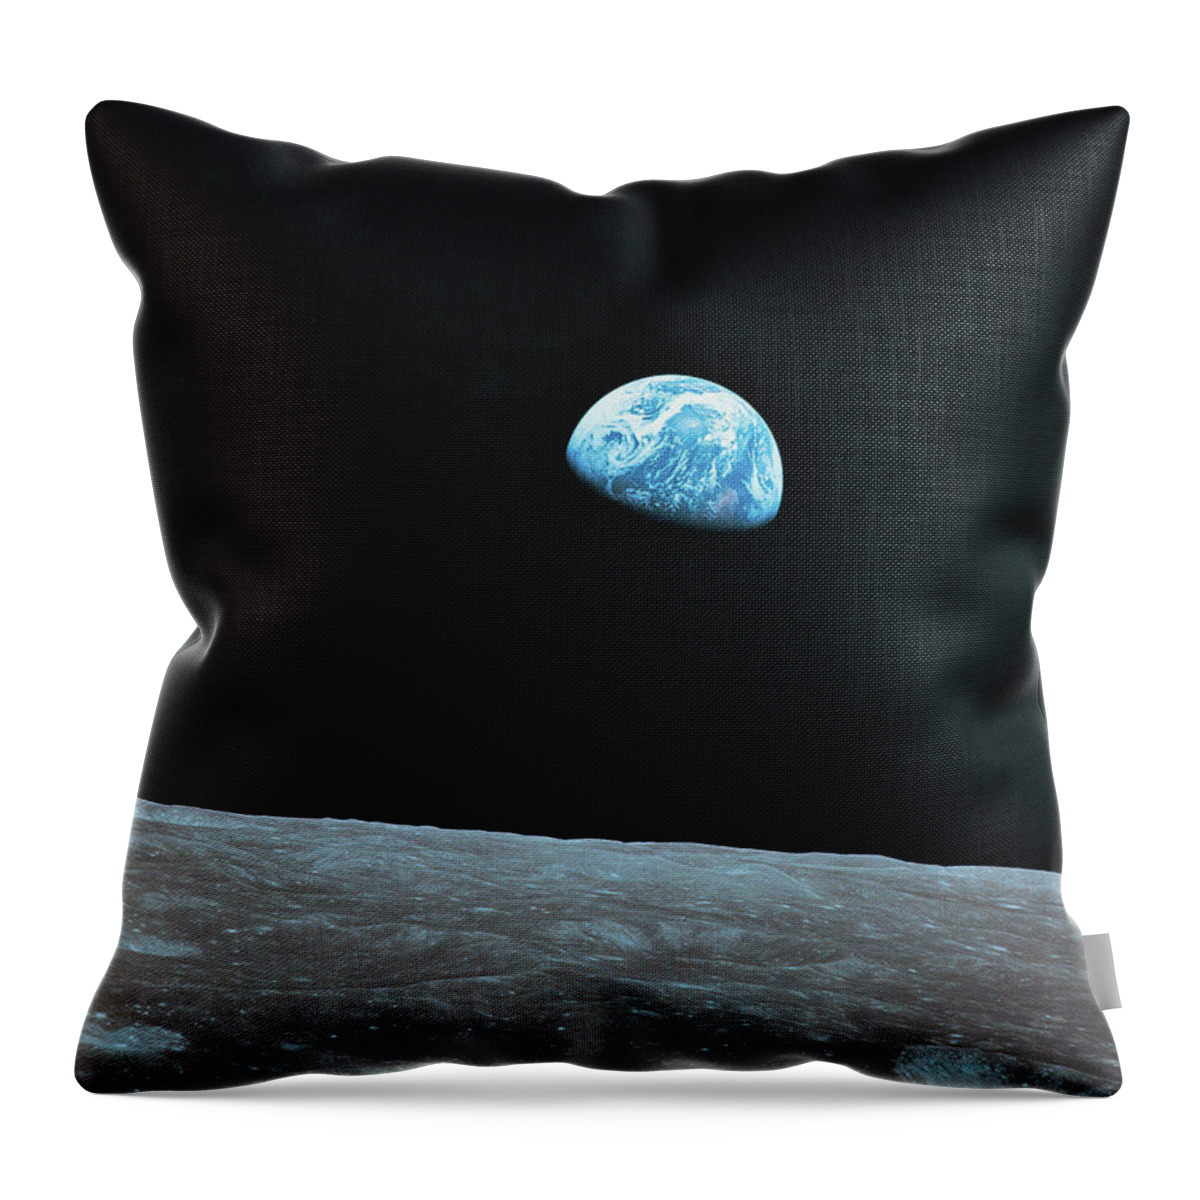 Black Color Throw Pillow featuring the photograph Earth And Lunar Landscape by Digital Vision.